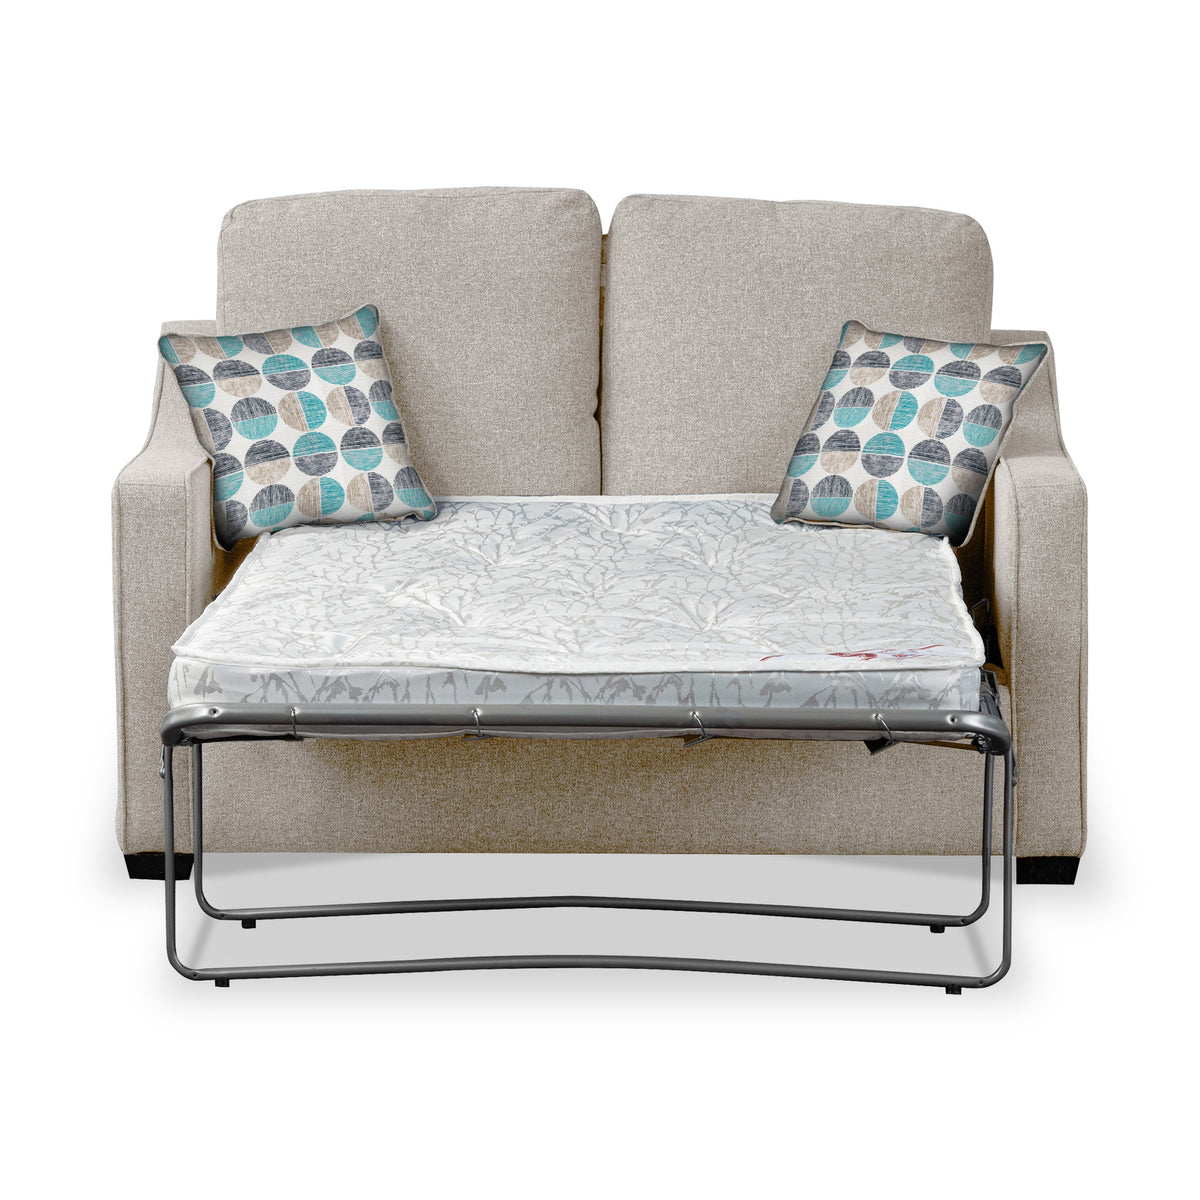 Fenton Oatmeal Soft Weave 2 Seater Sofabed with Duck Egg Scatter Cushions from Roseland Furniture